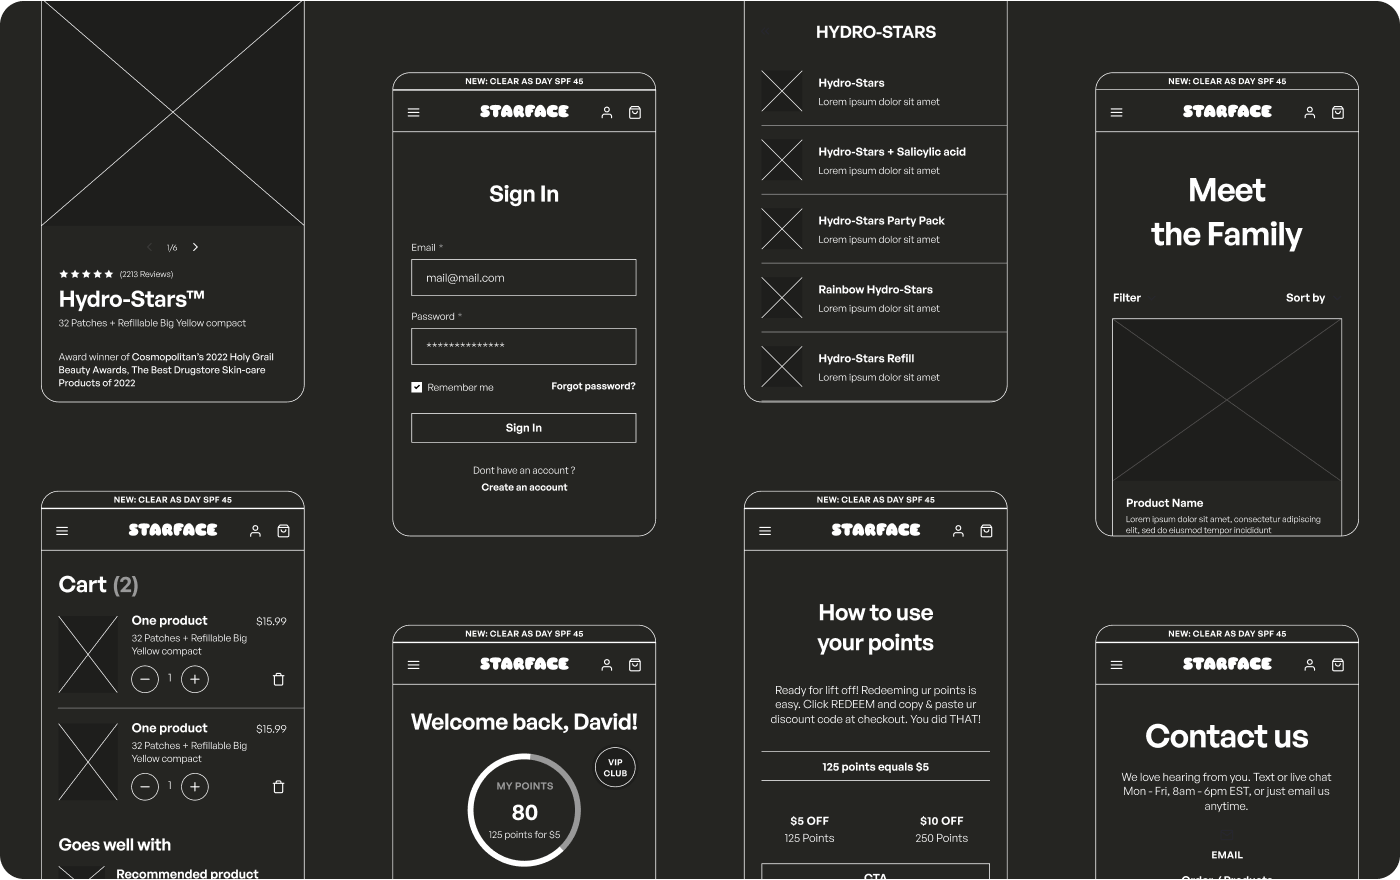 We created a full set of wireframes before moving to the high-fidelity design